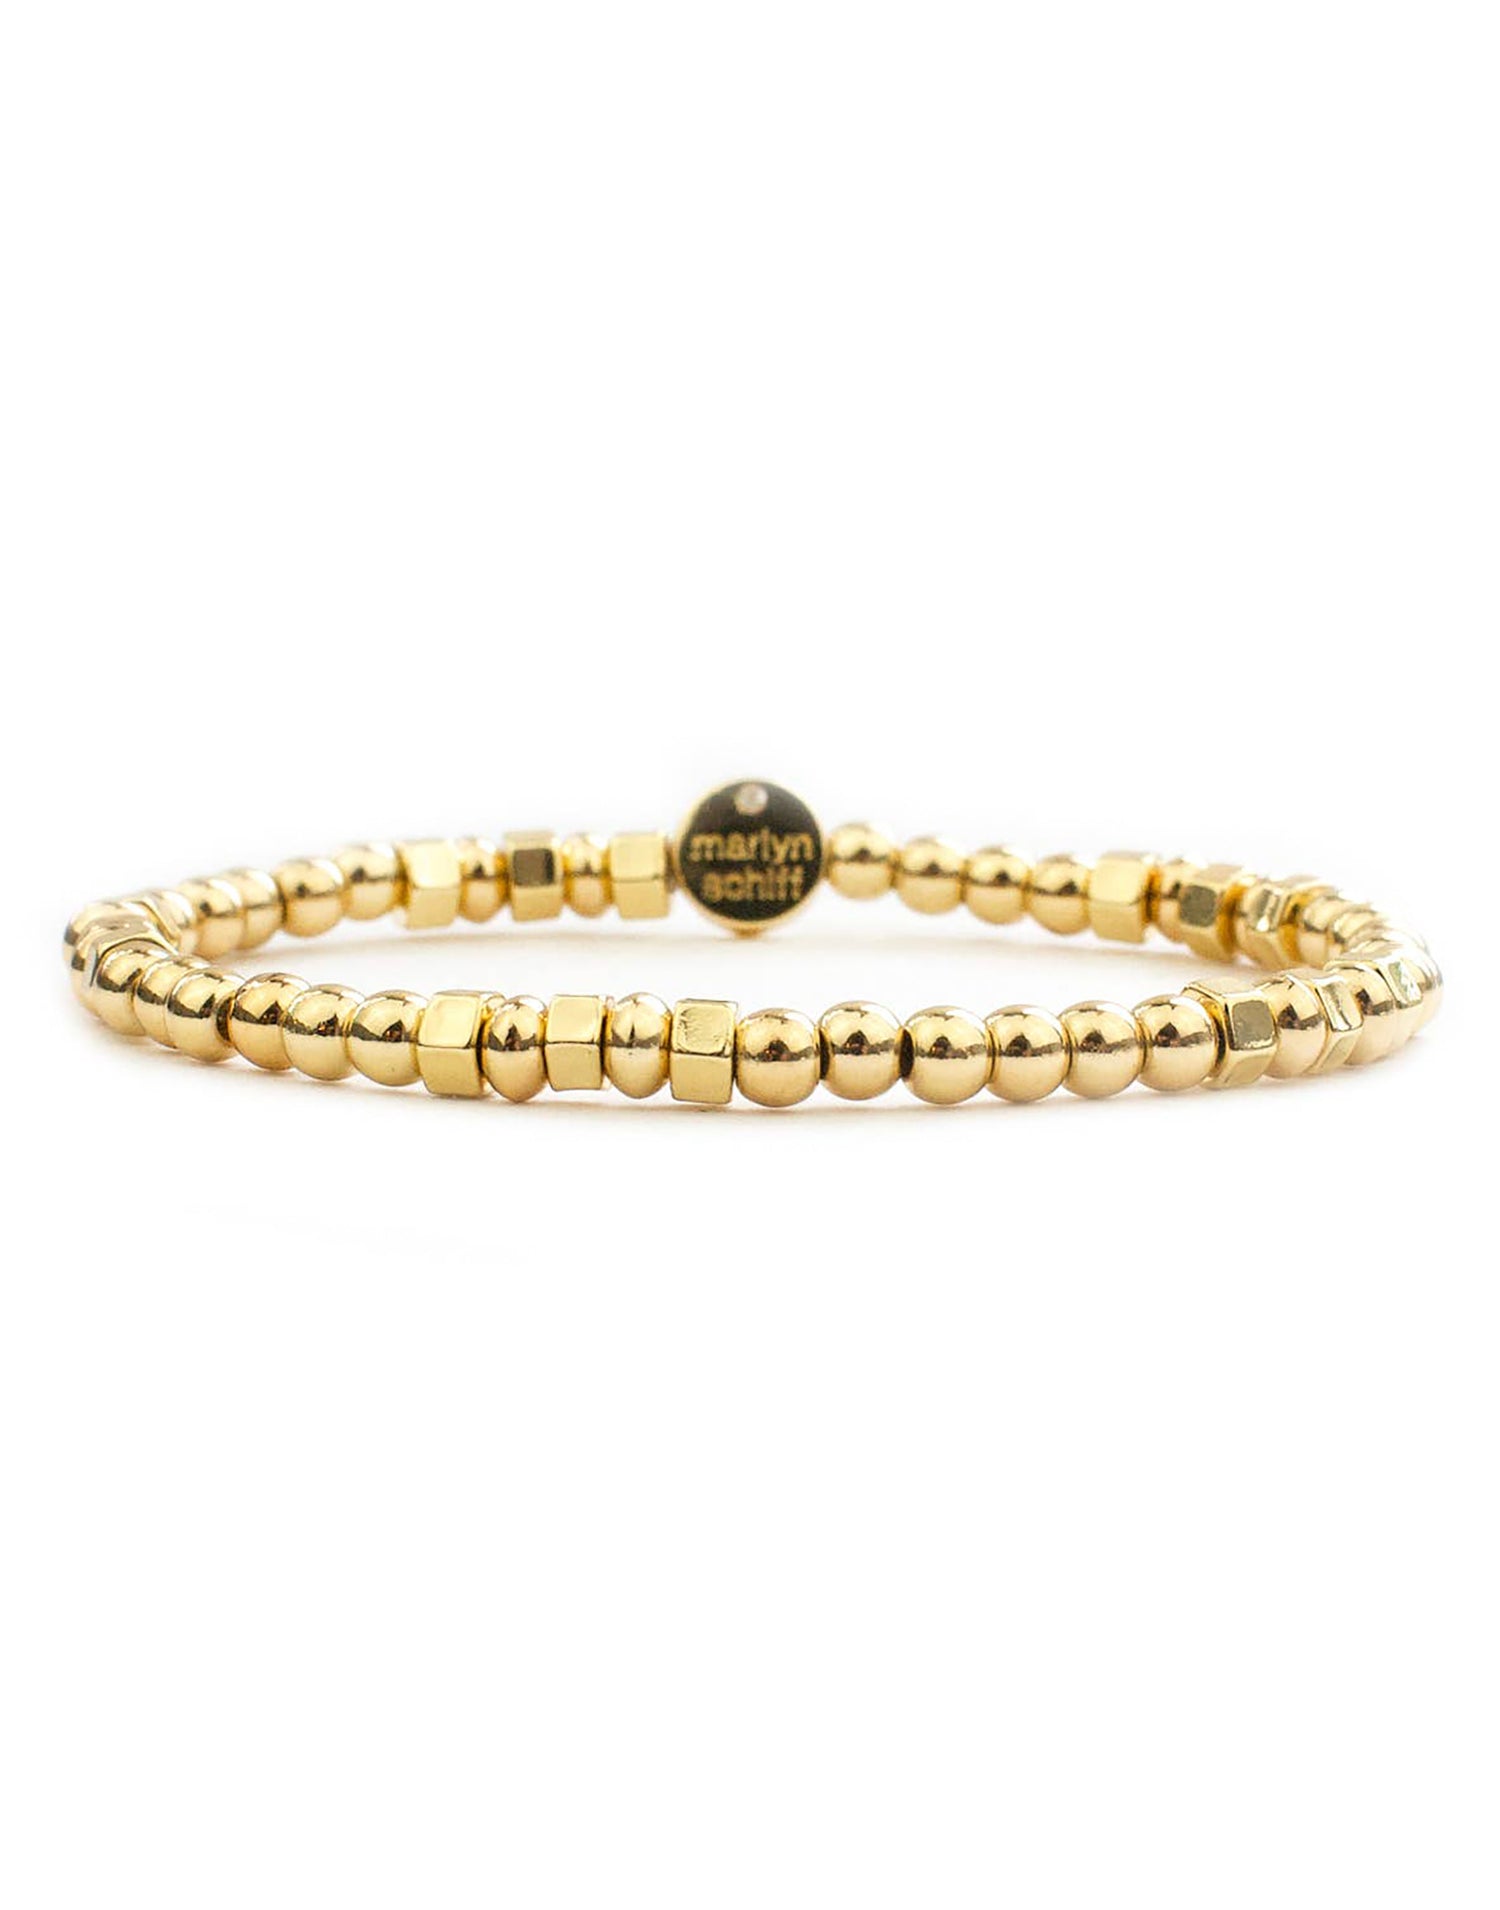 Mixed Shape Beaded Bracelet by Marlyn Schiff in Gold - Product View